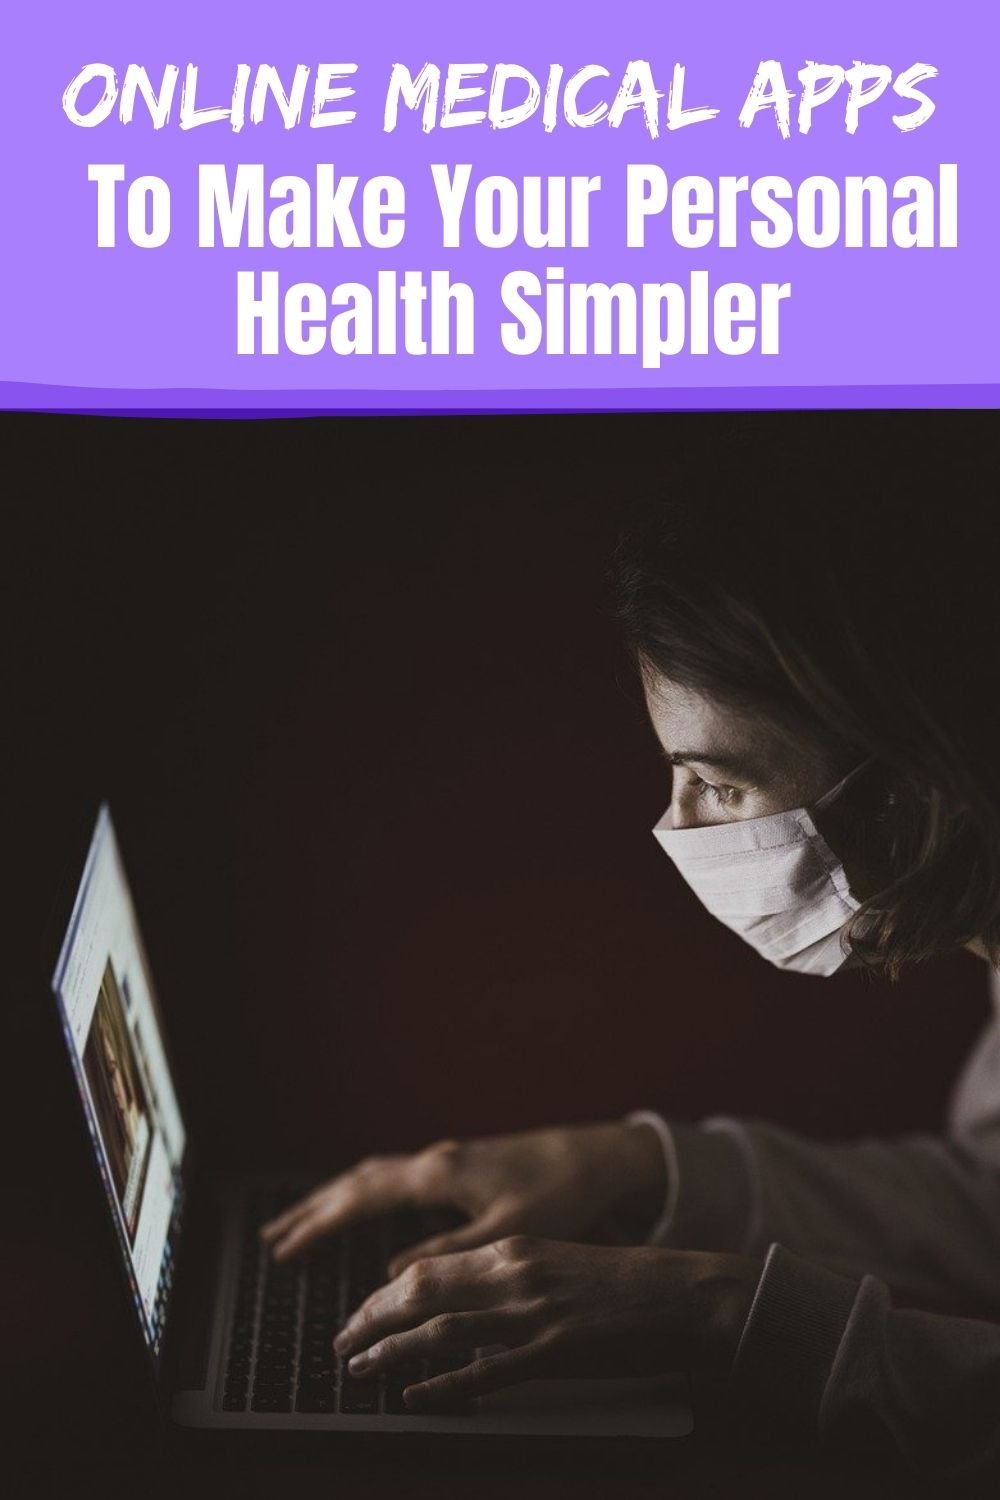 Online Medical Apps to Make Your Personal Health Simpler